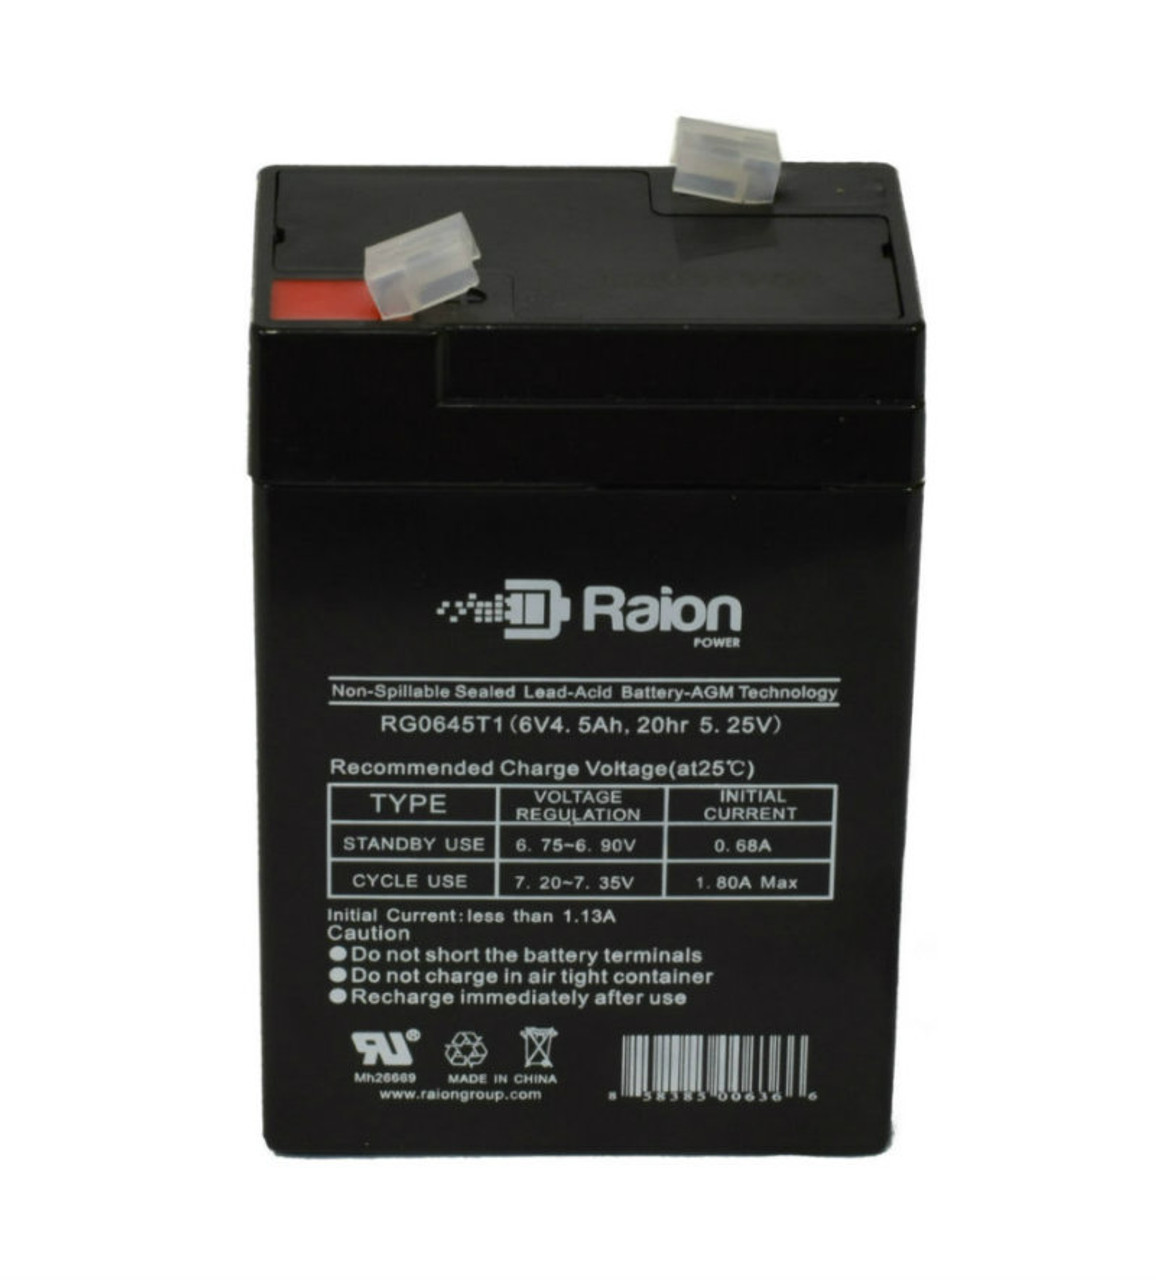 Raion Power RG0645T1 Replacement Battery Cartridge for Light Alarms 2MS